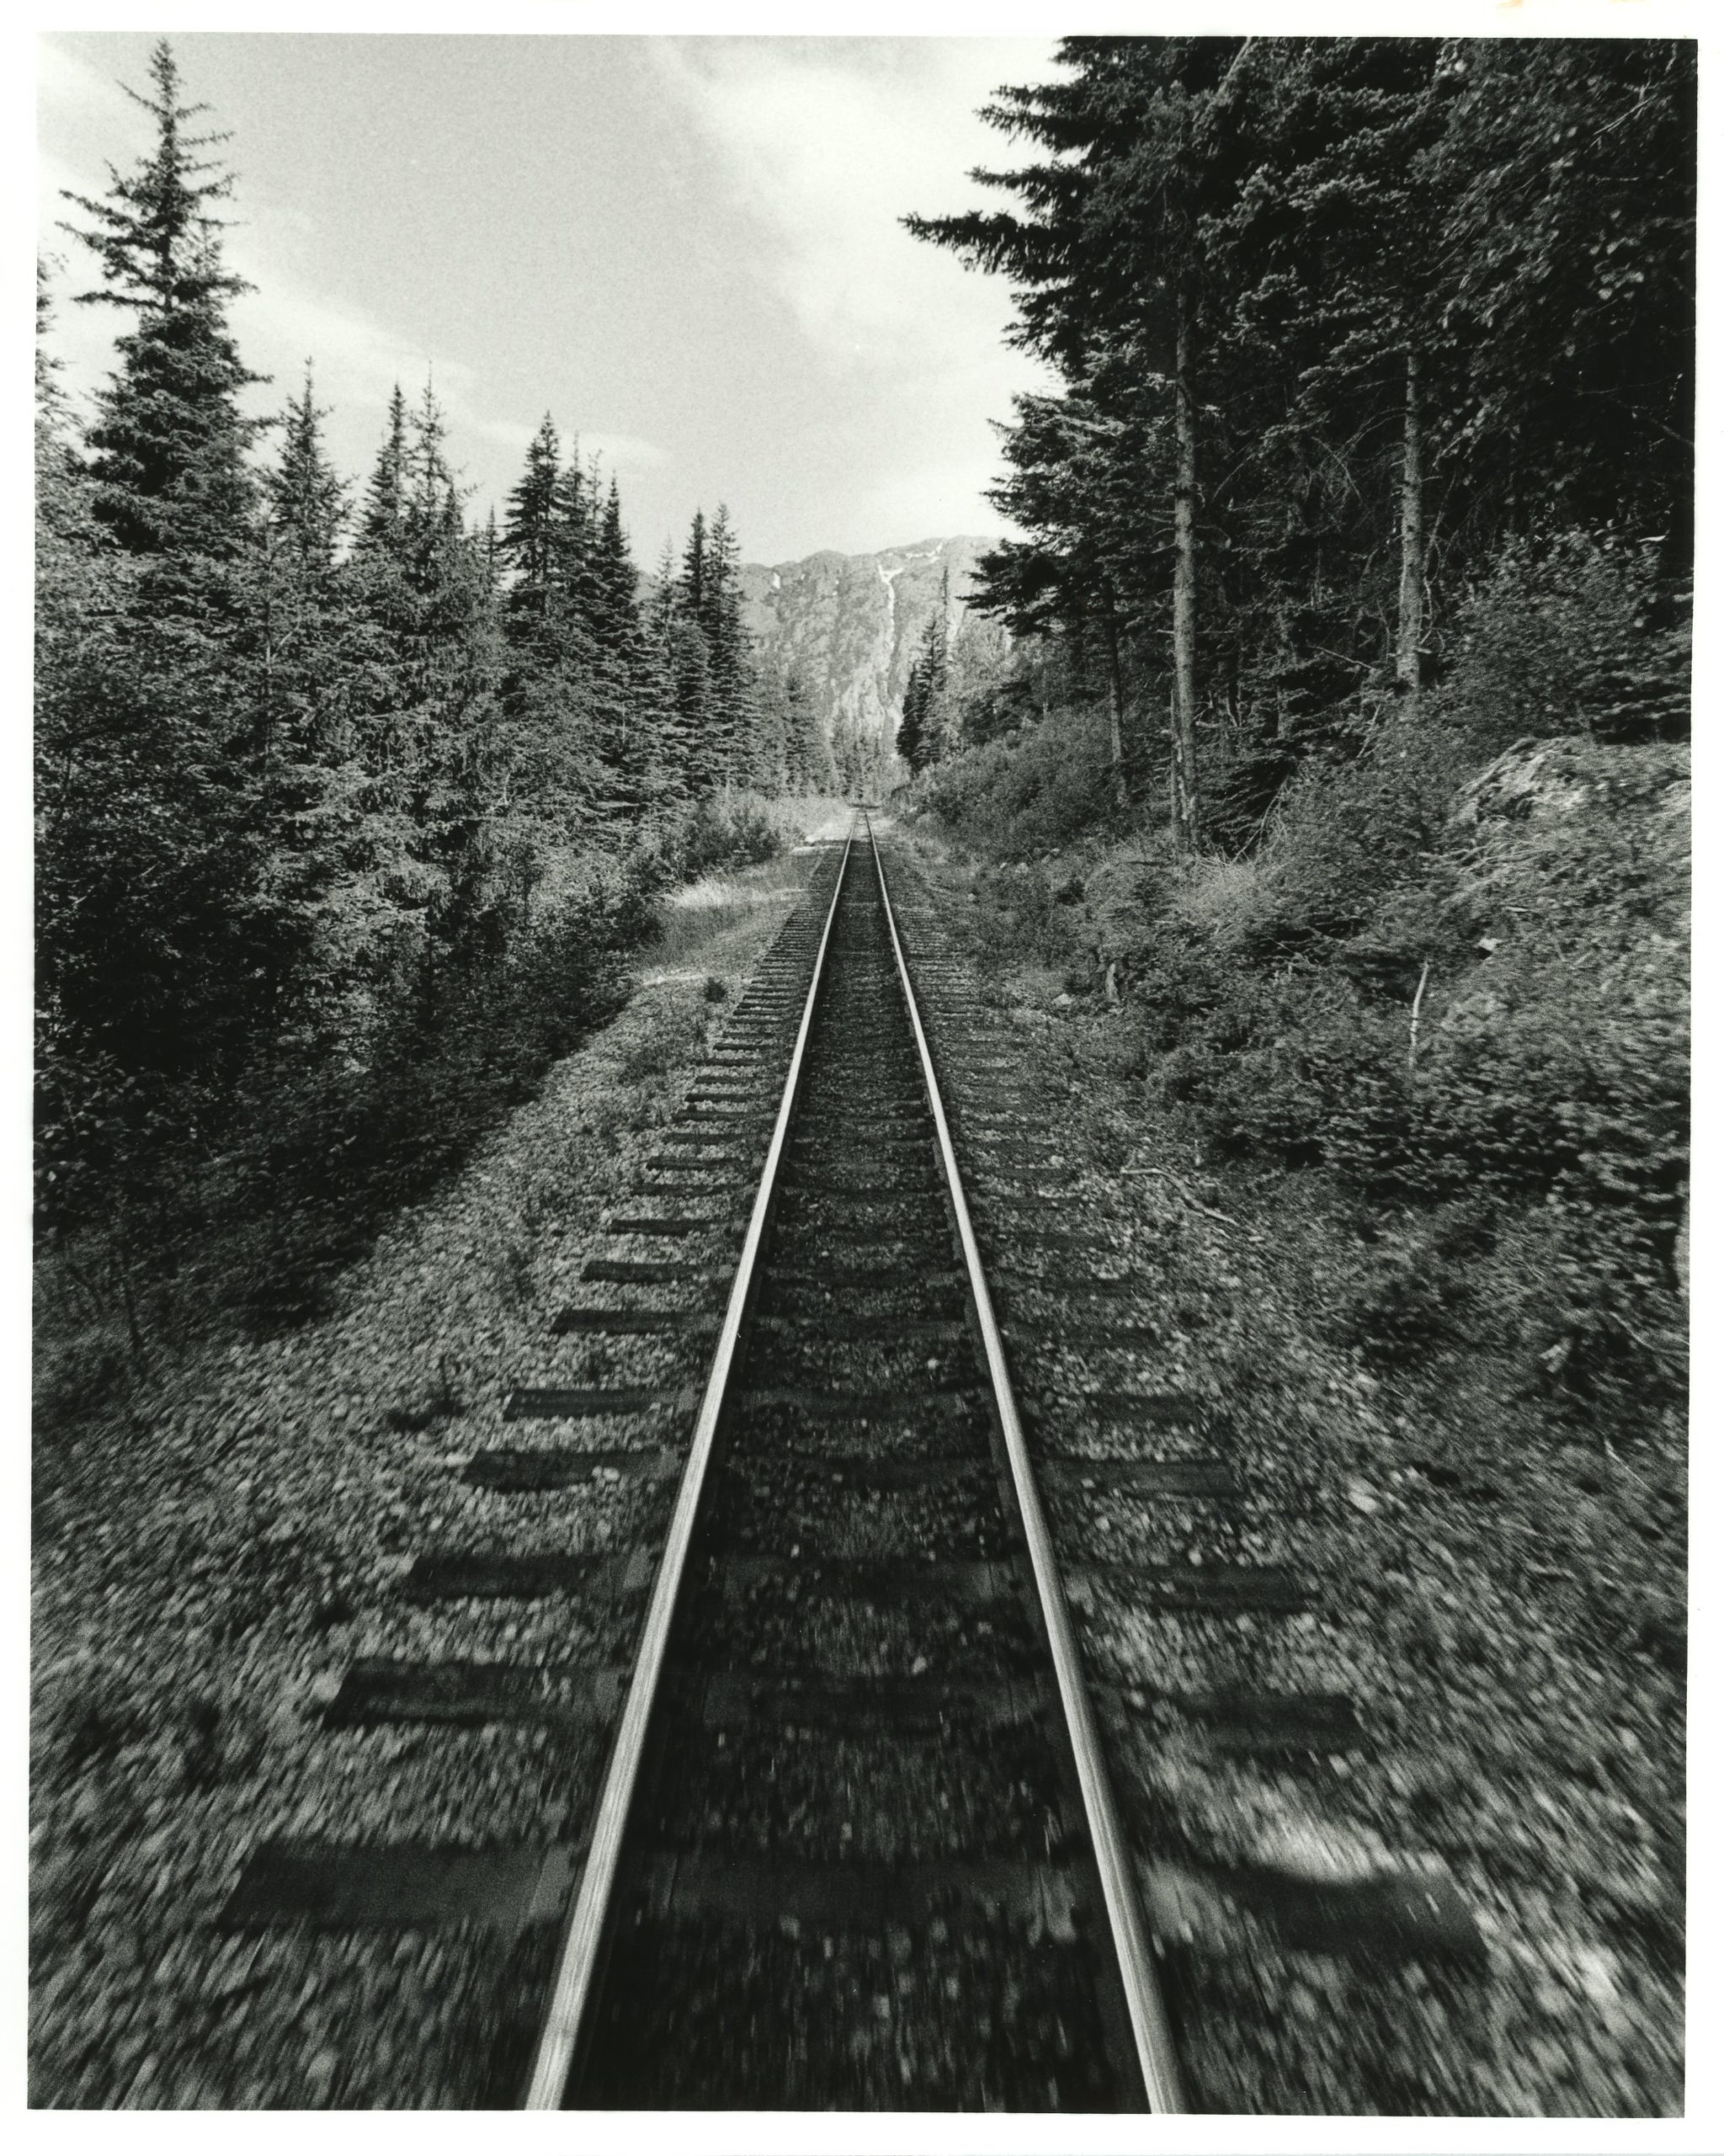 Revisiting The White Pass Train